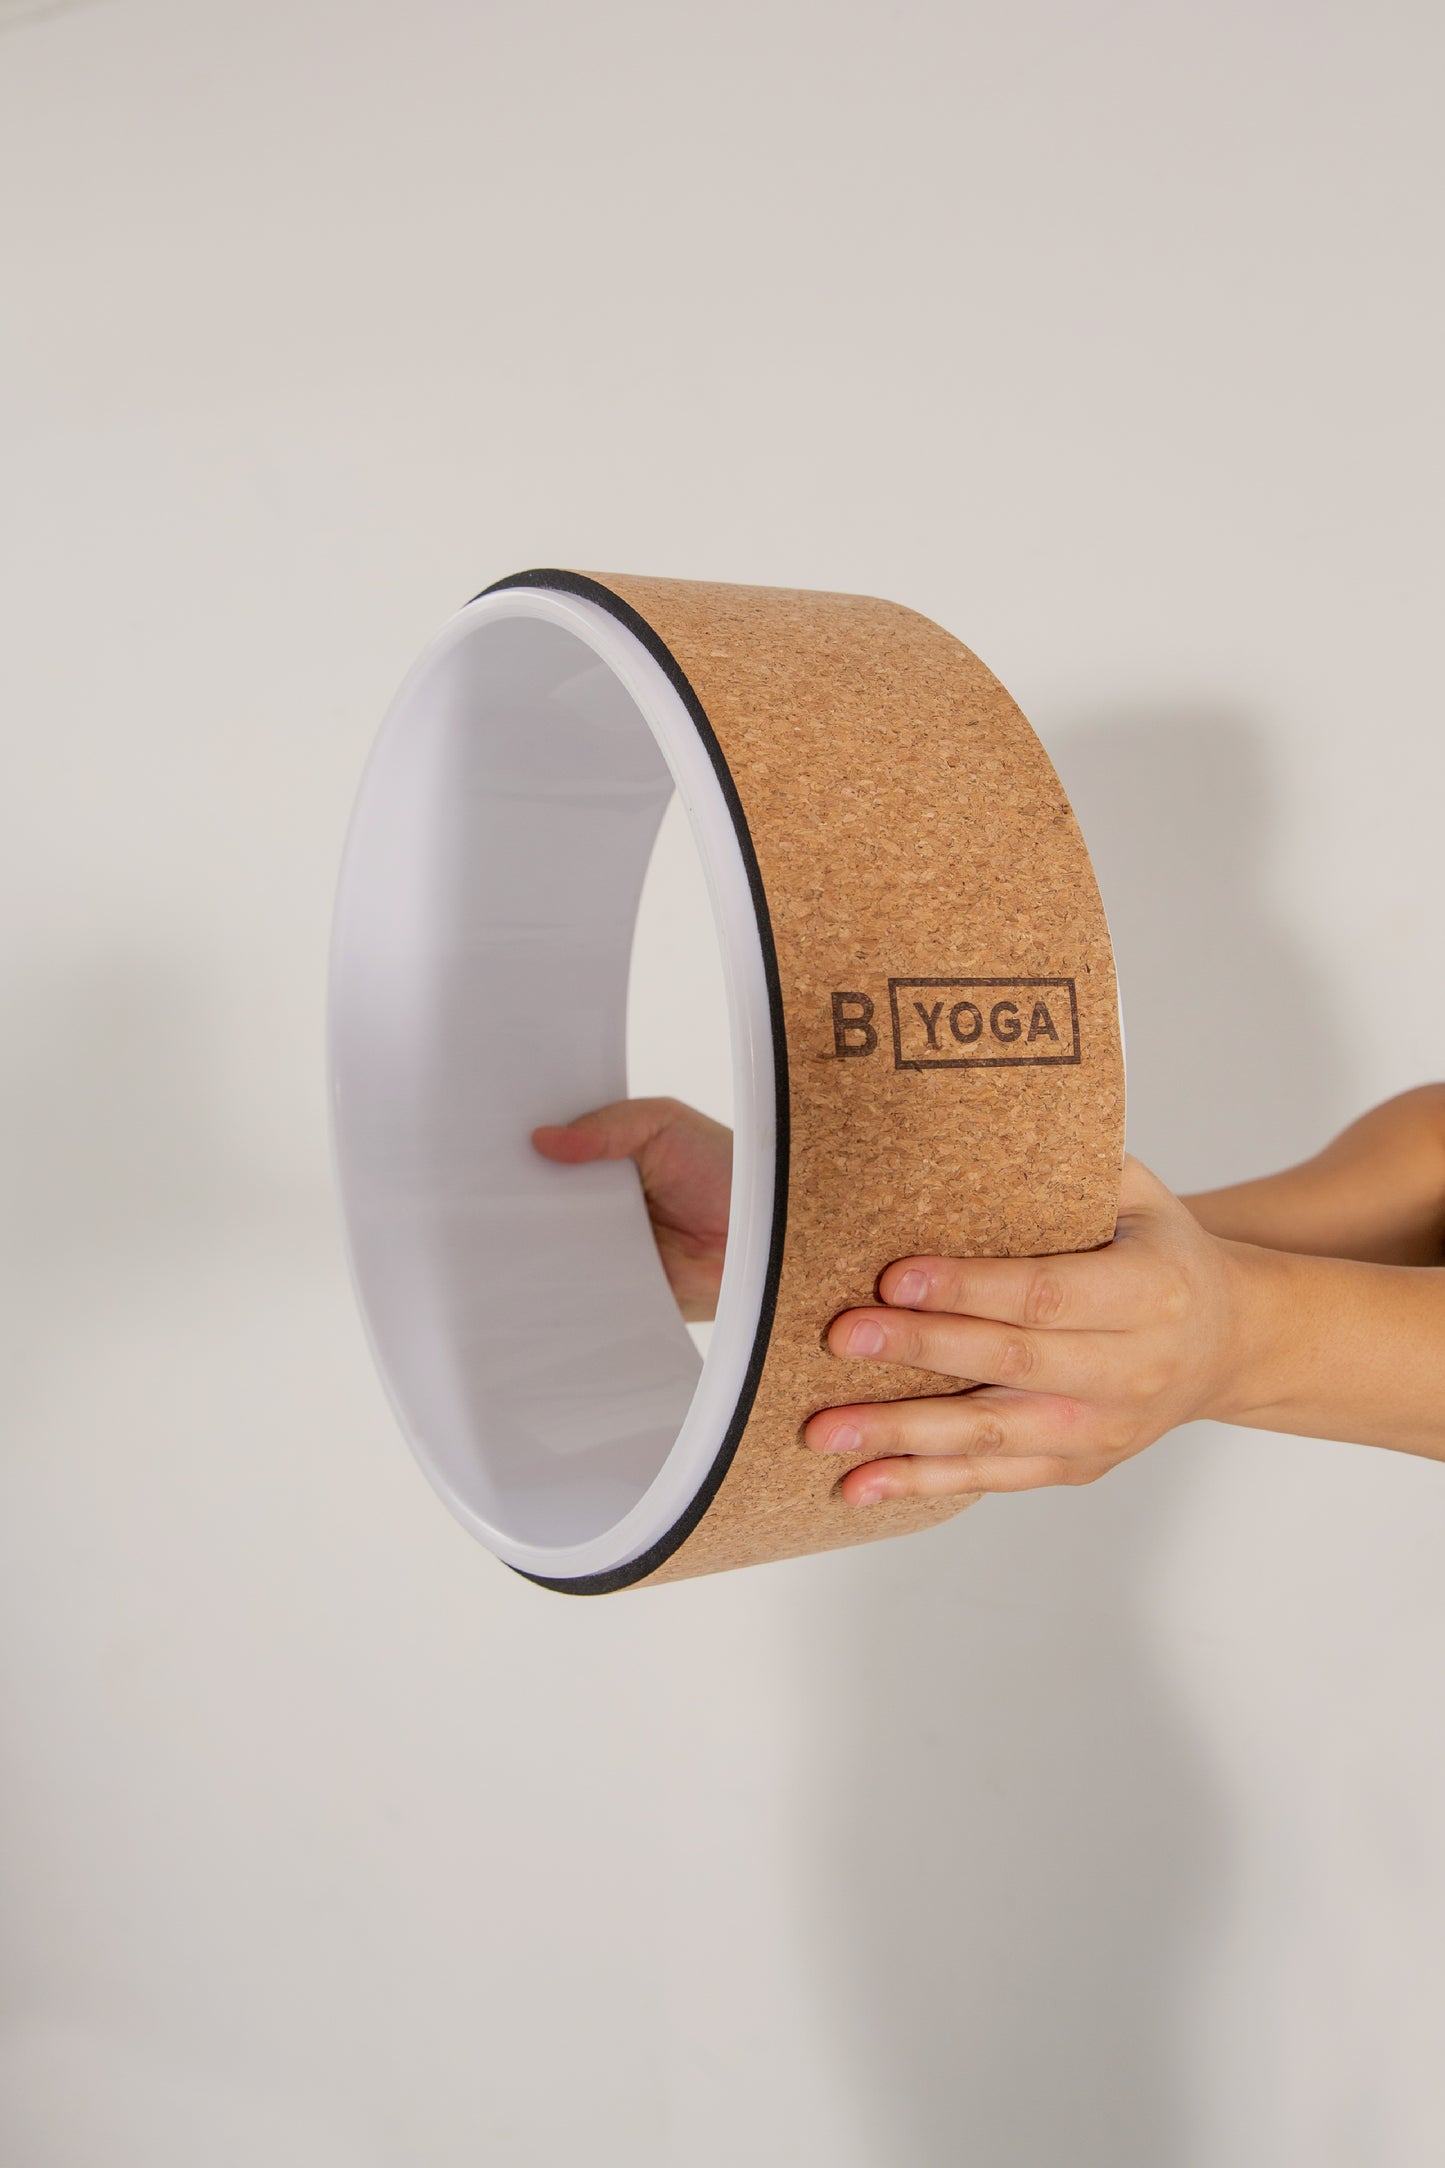 
                  
                    The Freedom Wheel - a cork yoga wheel by BYOGA will help you open your heart, chest and shoulders while freeing up your upper back. Photographed on a white background with someones hands holding the yoga wheel outstretched..
                  
                